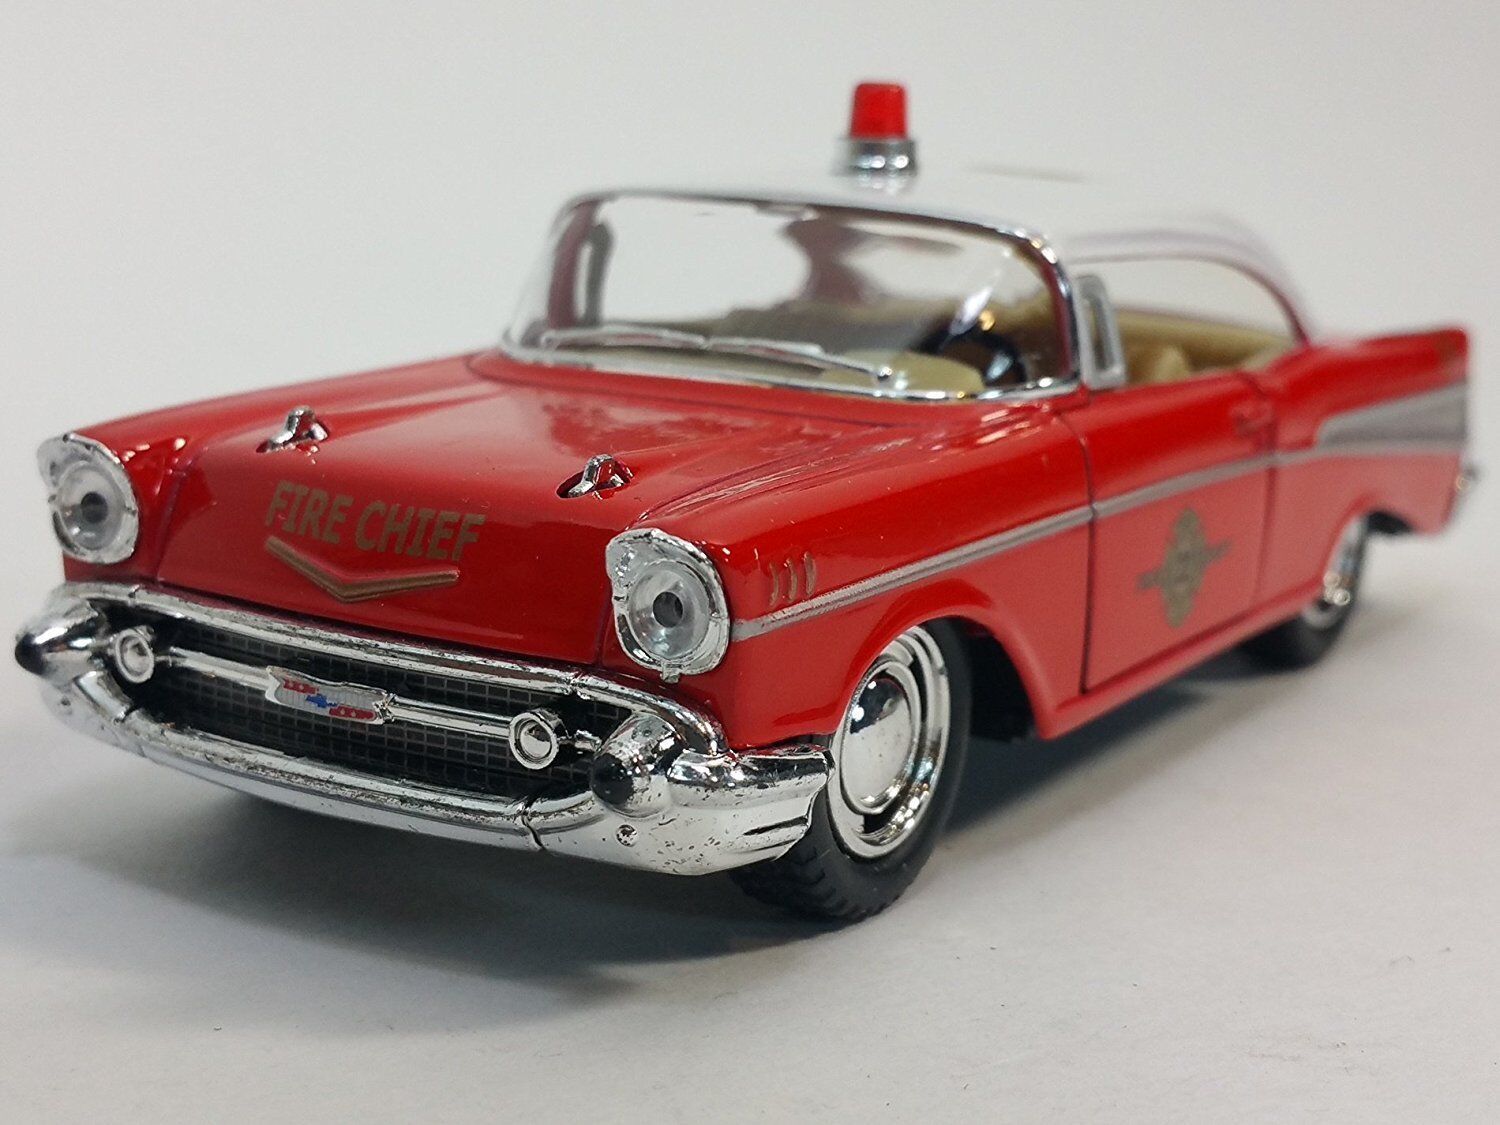 Primary image for 5" Kinsmart 1957 Chevrolet Bel Air Fire Chief 1:40 Diecast Model Toy Car Chevy